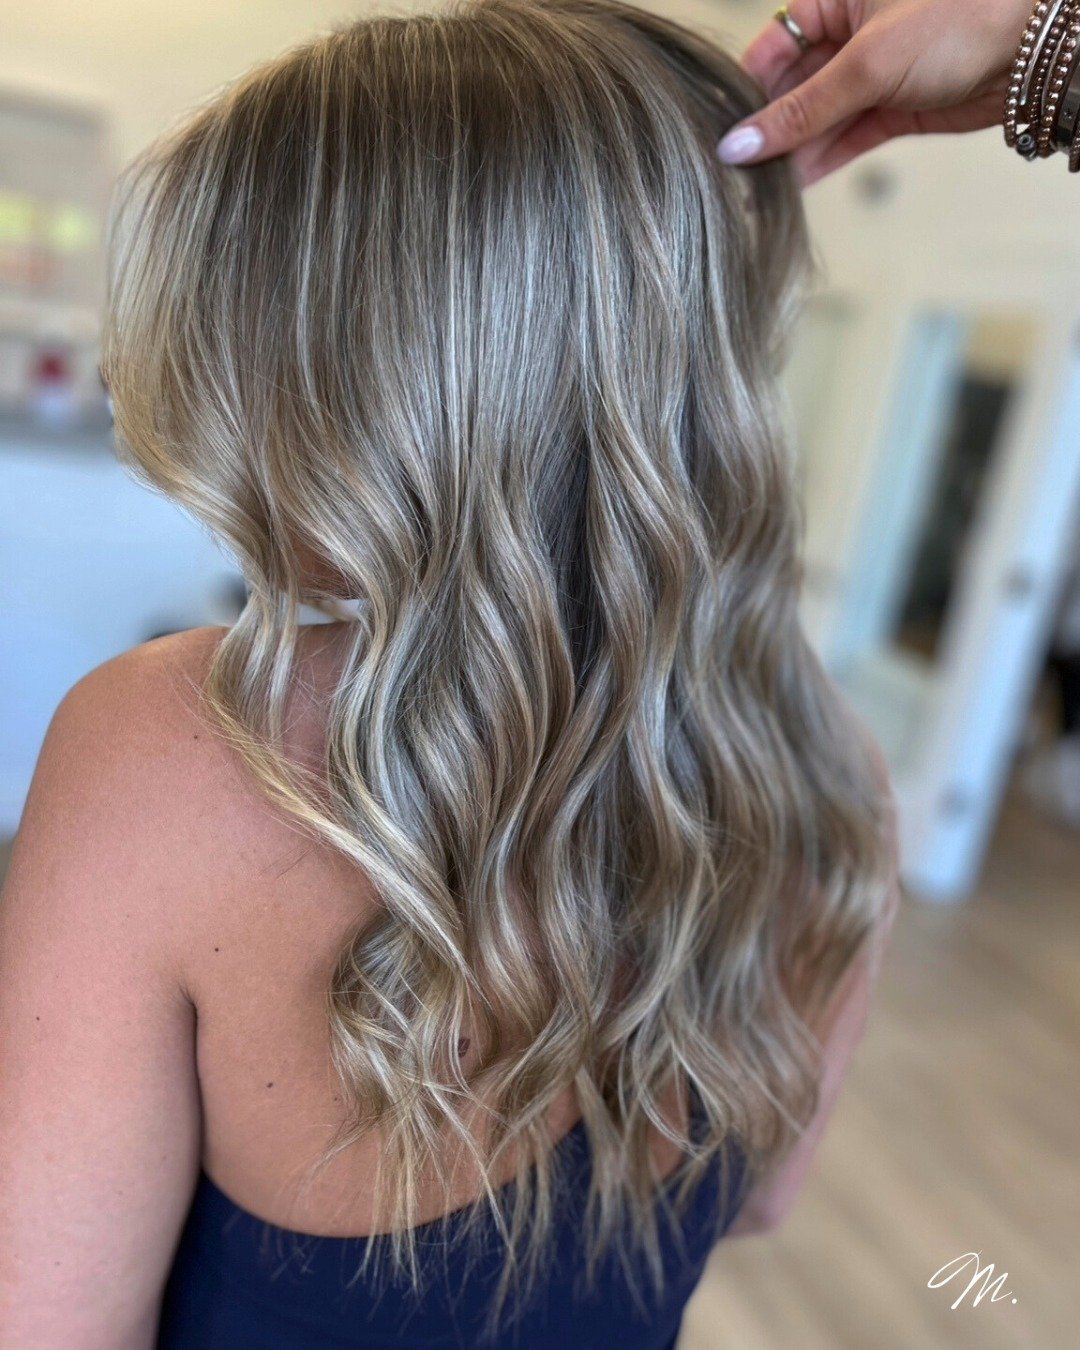 Knowing when to lowlight and melt my blondes has been a game changer in making my blondes pop! ⁠
⁠
My go to lowlight is @redken 8N 7G 7NB 🤌🏽⁠
.⁠
.⁠
.⁠
#blondebalayage #balayage #blondehair #dimensionalblonde #blondehairinspo #blondehairideas #balay